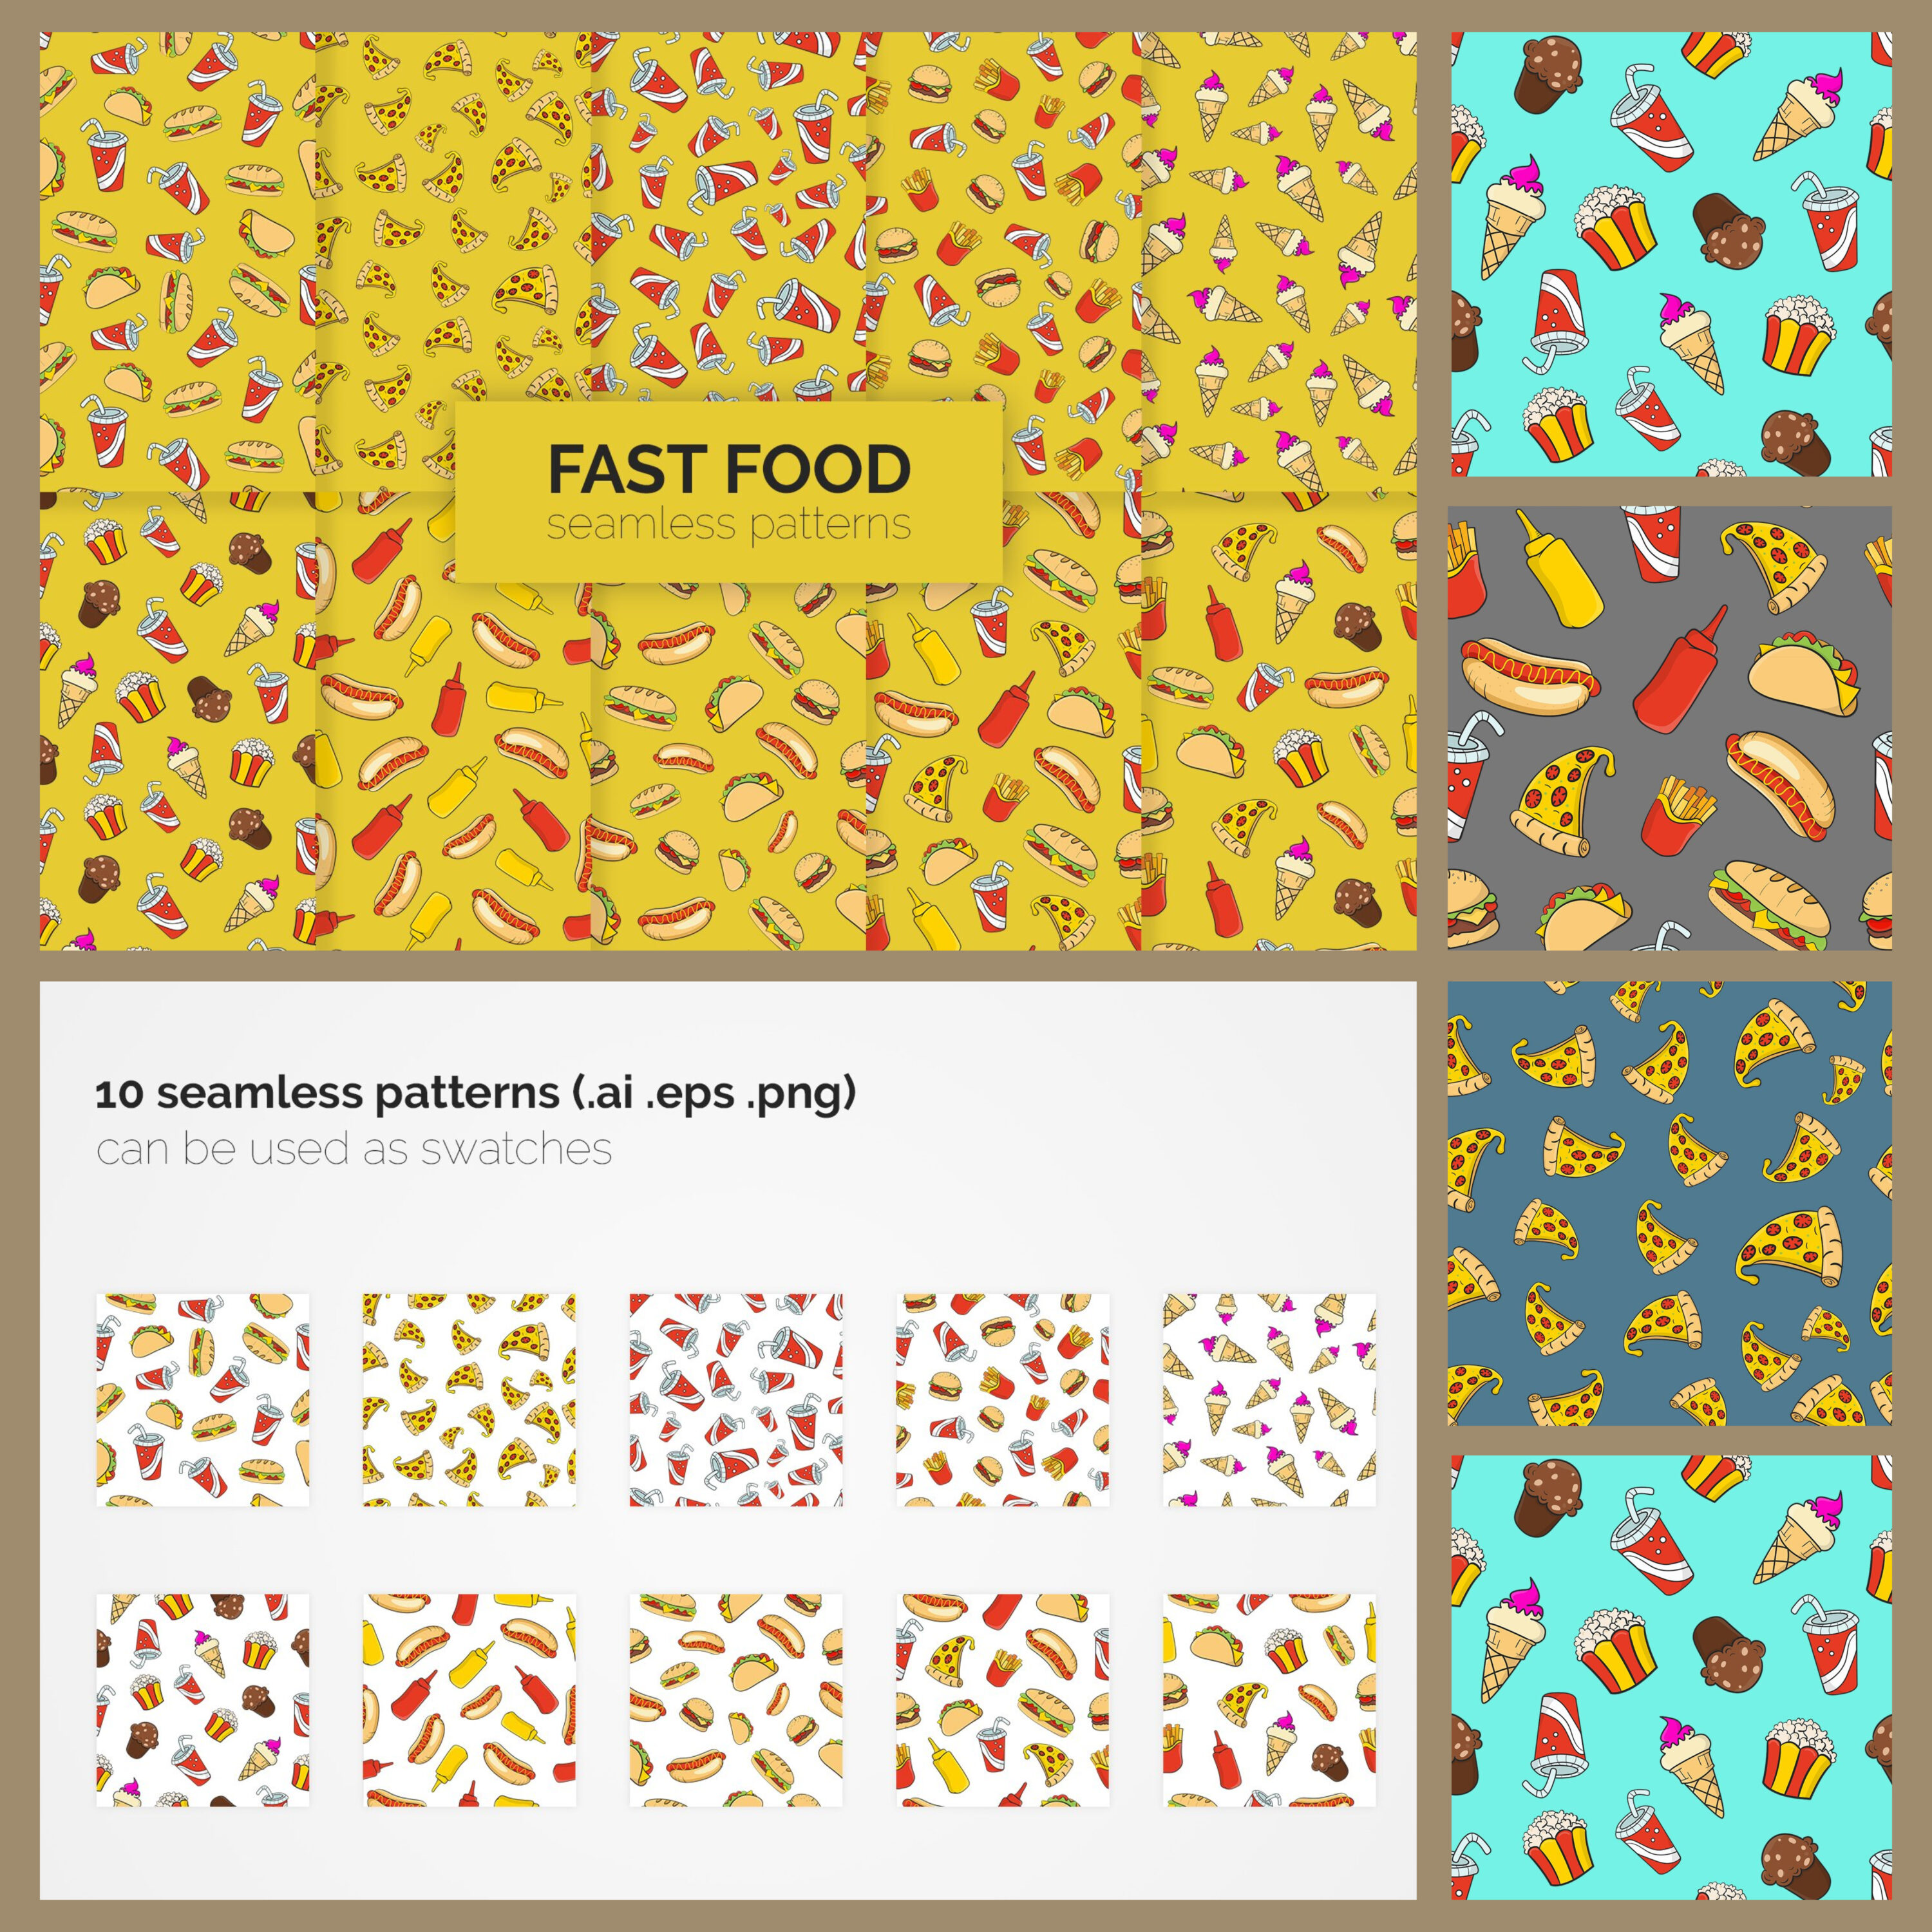 Preview fast food seamless patterns.